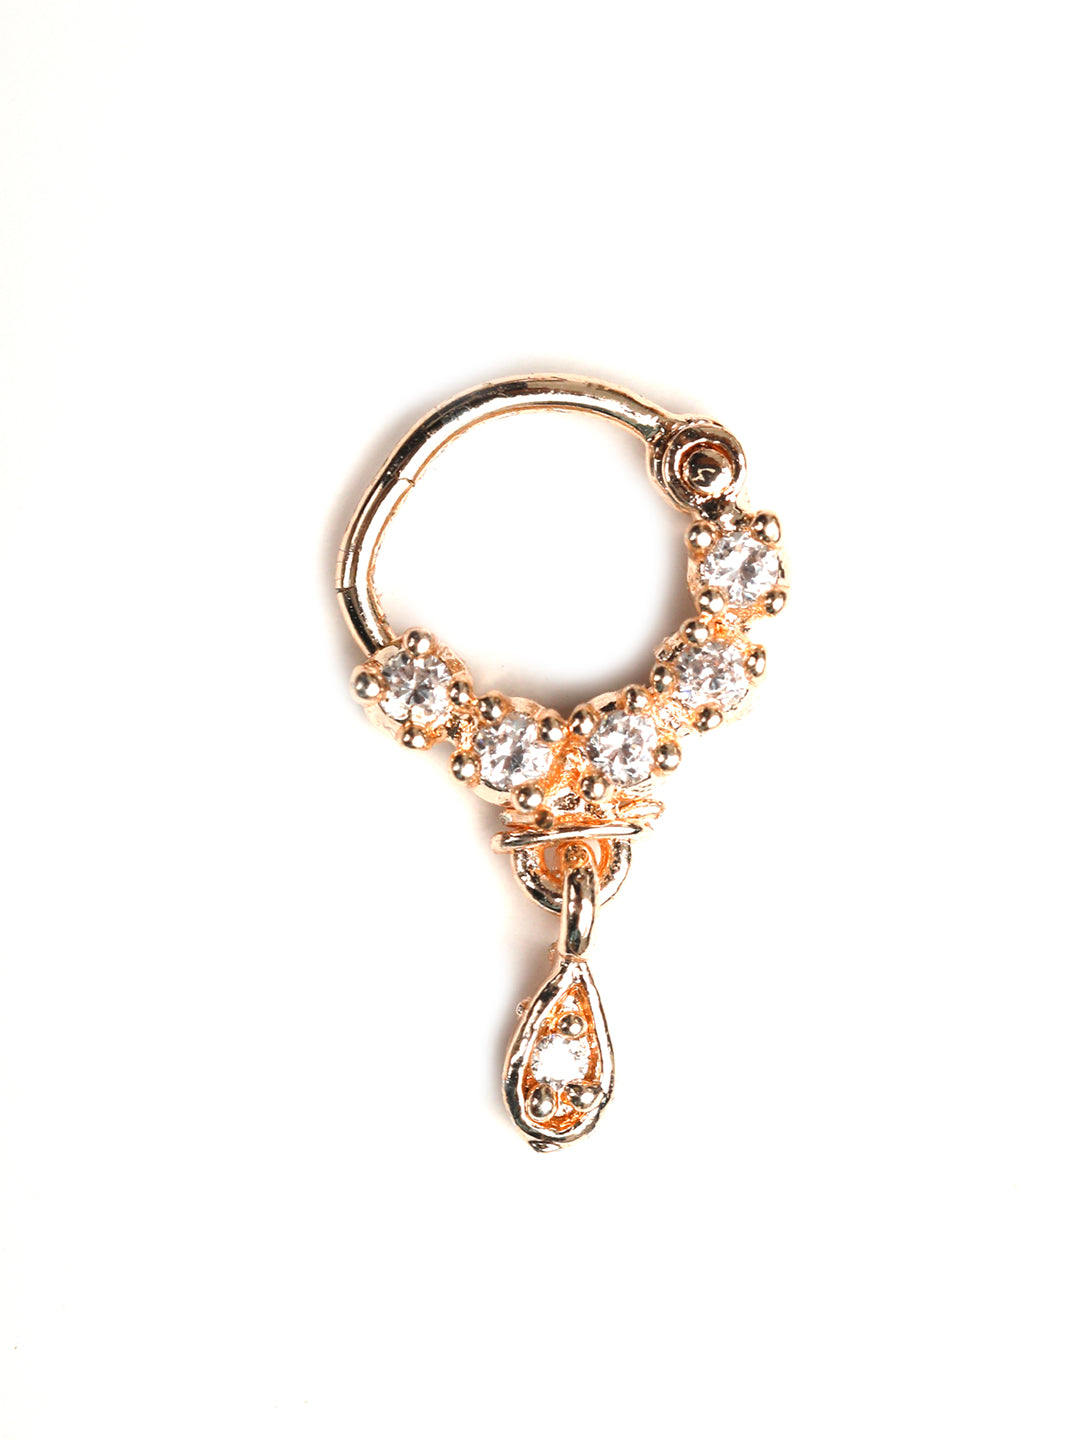 Mia by Tanishq 14 KT Triangular Rose Gold Diamond Nose Pin 14kt Rose Gold  Nose Wire Price in India - Buy Mia by Tanishq 14 KT Triangular Rose Gold  Diamond Nose Pin